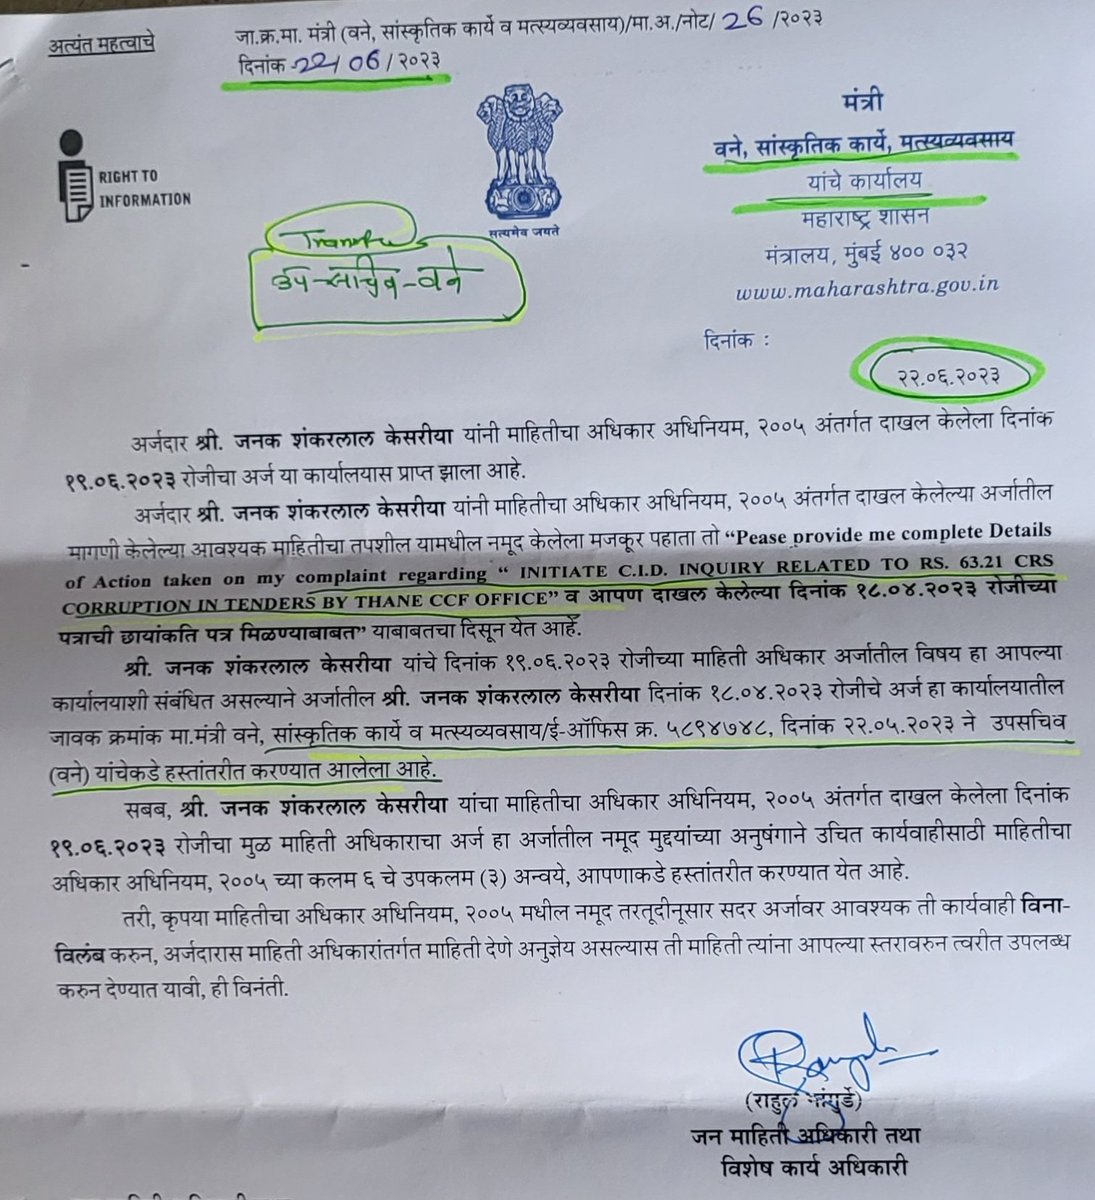 #SudhirMungantiwar #Forest minister sends our #Complaint regarding 
 'INITIATE C.I.D. INQUIRY RELATED TO RS.63.21 CRS CORRUPTION BY THANE CCF OFFICE ' to Deputy #Secretary #Forest dept. #Mantralaya 
Waiting for action ASAP @SMungantiwar @AjitPawarSpeaks @timesofindia @mid_day